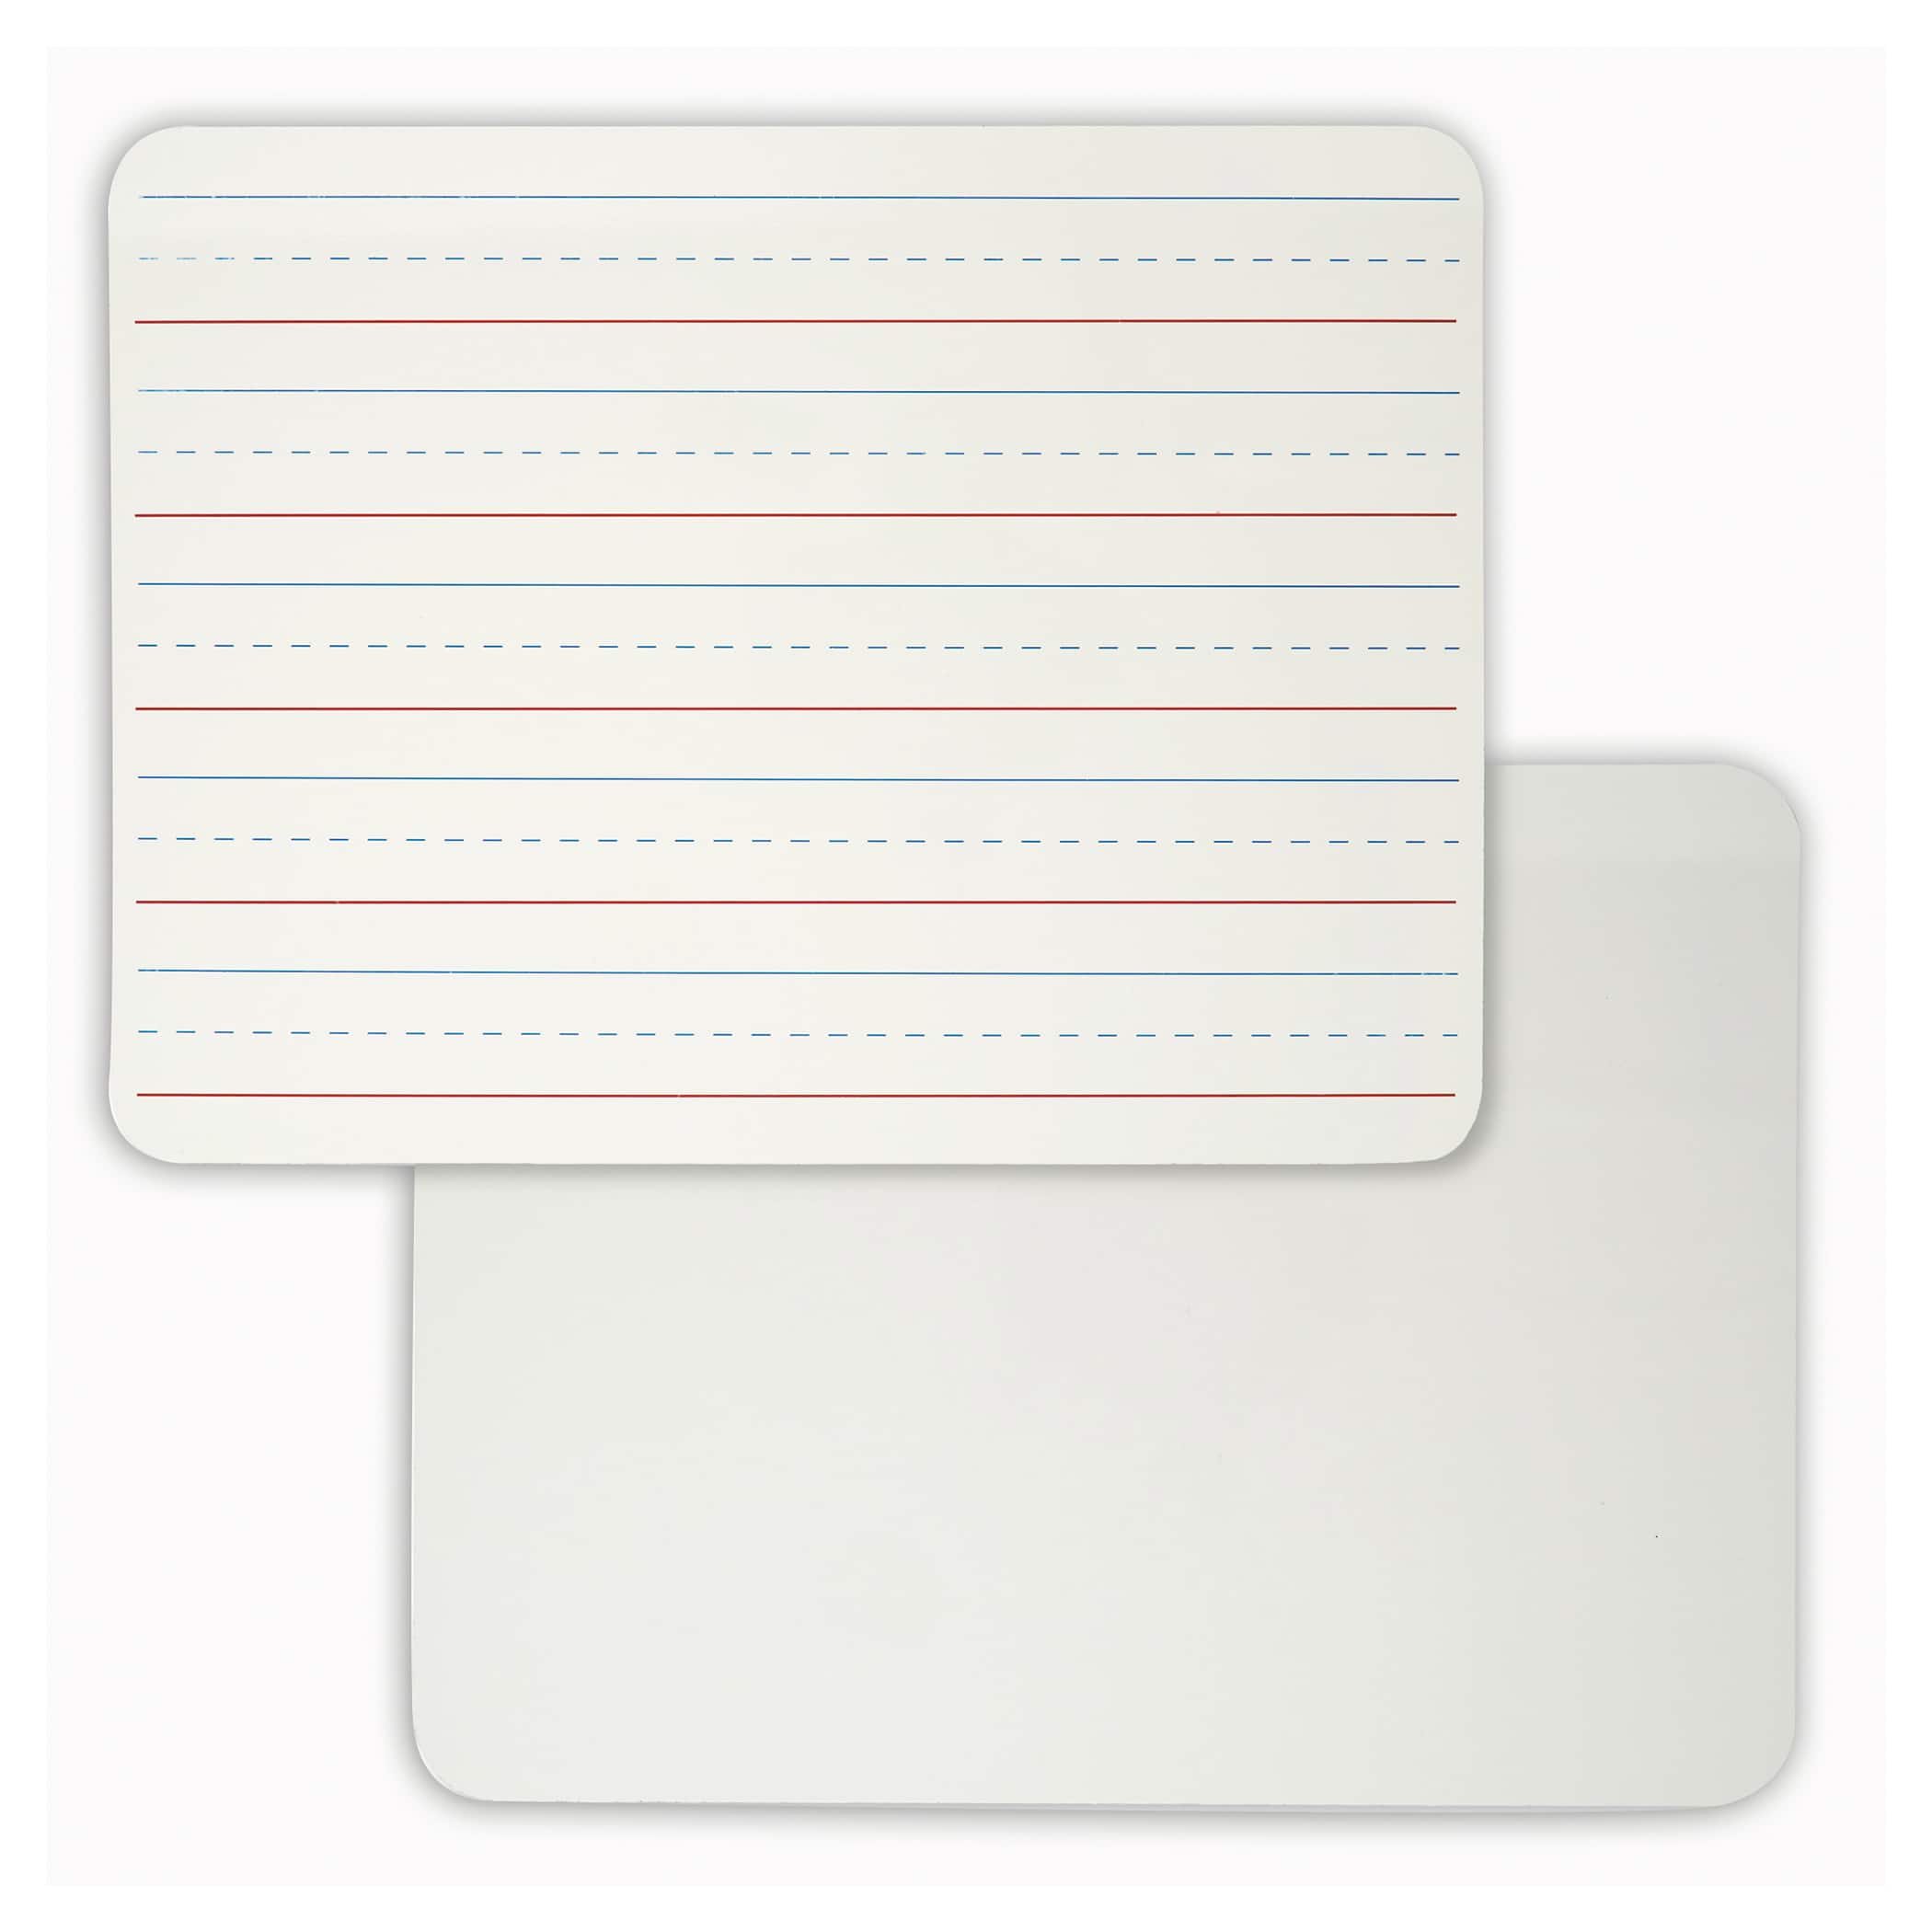 4 Packs: 6 ct. (24 total) White Lined &#x26; Plain Dry Erase Boards